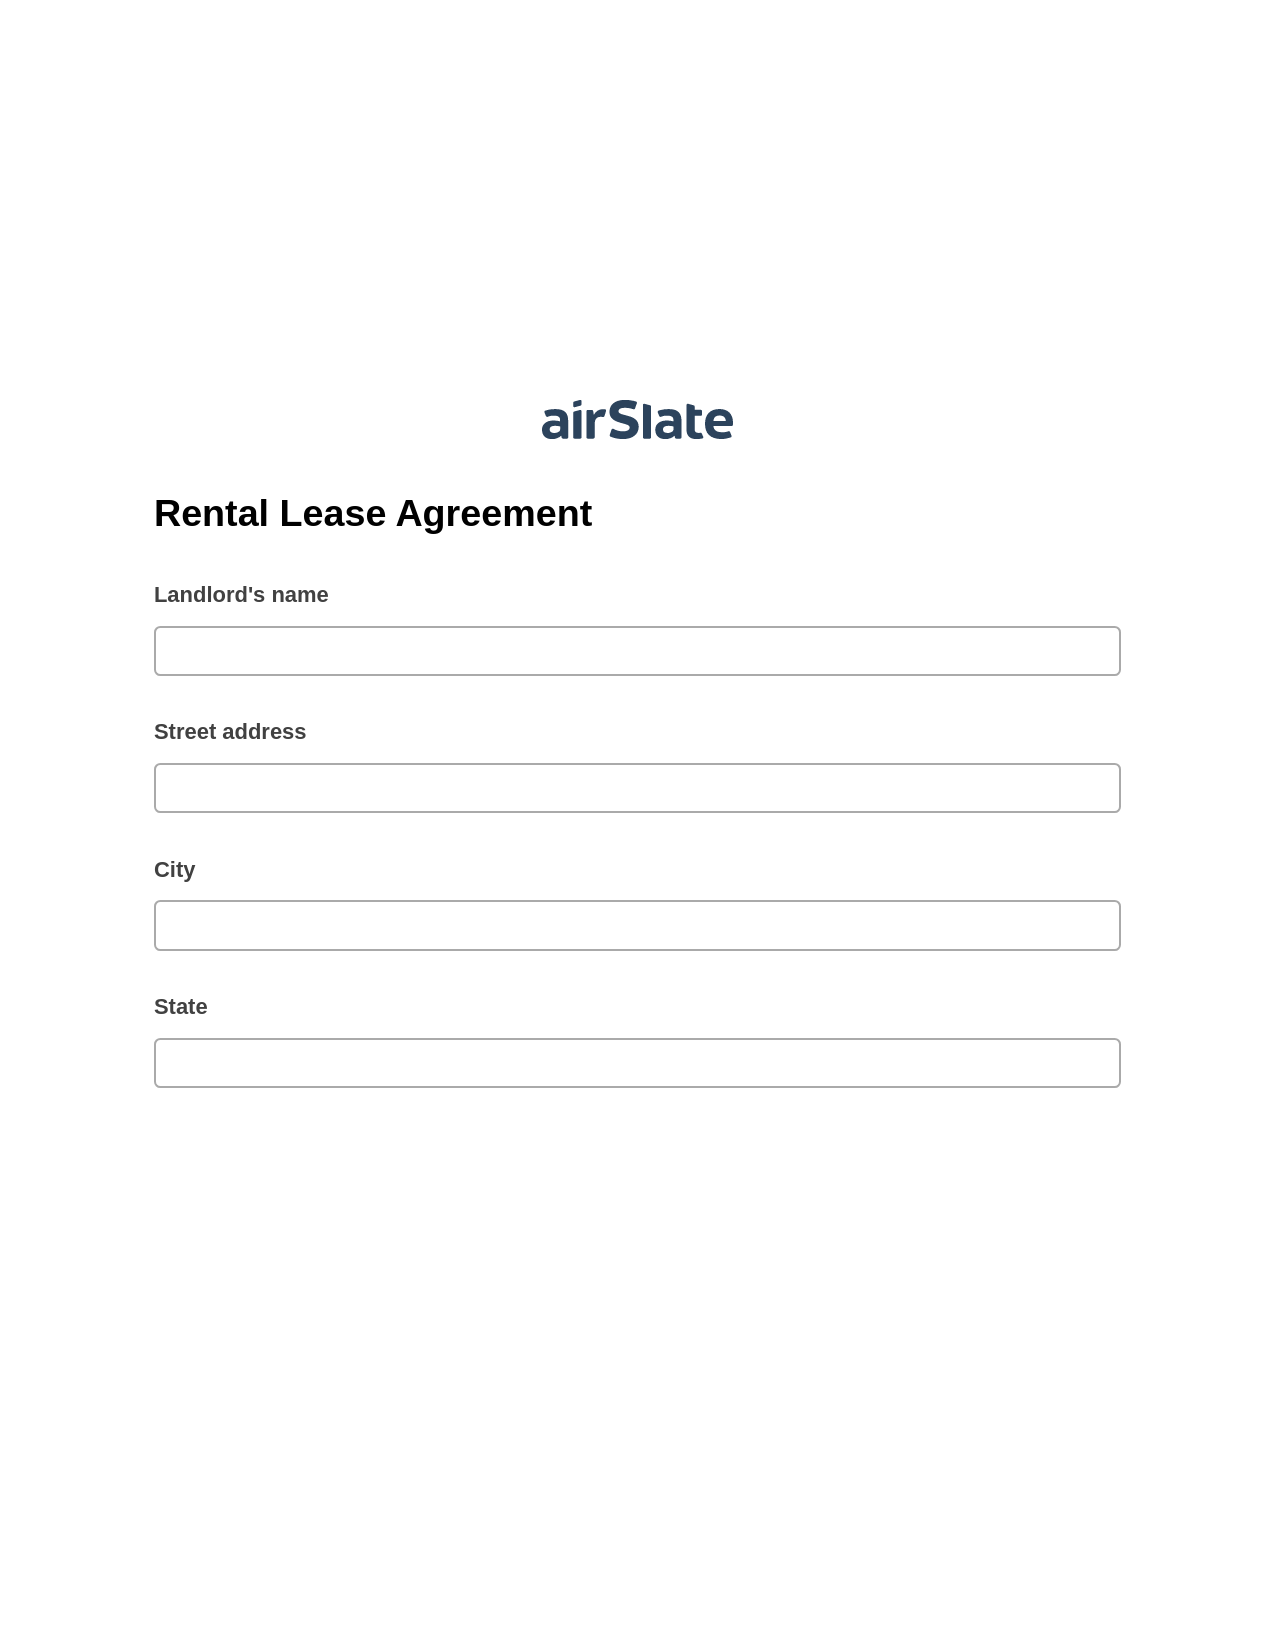 Rental Lease Agreement Pre-fill from Salesforce Records with SOQL Bot, Document Hide Bot, Export to Excel 365 Bot